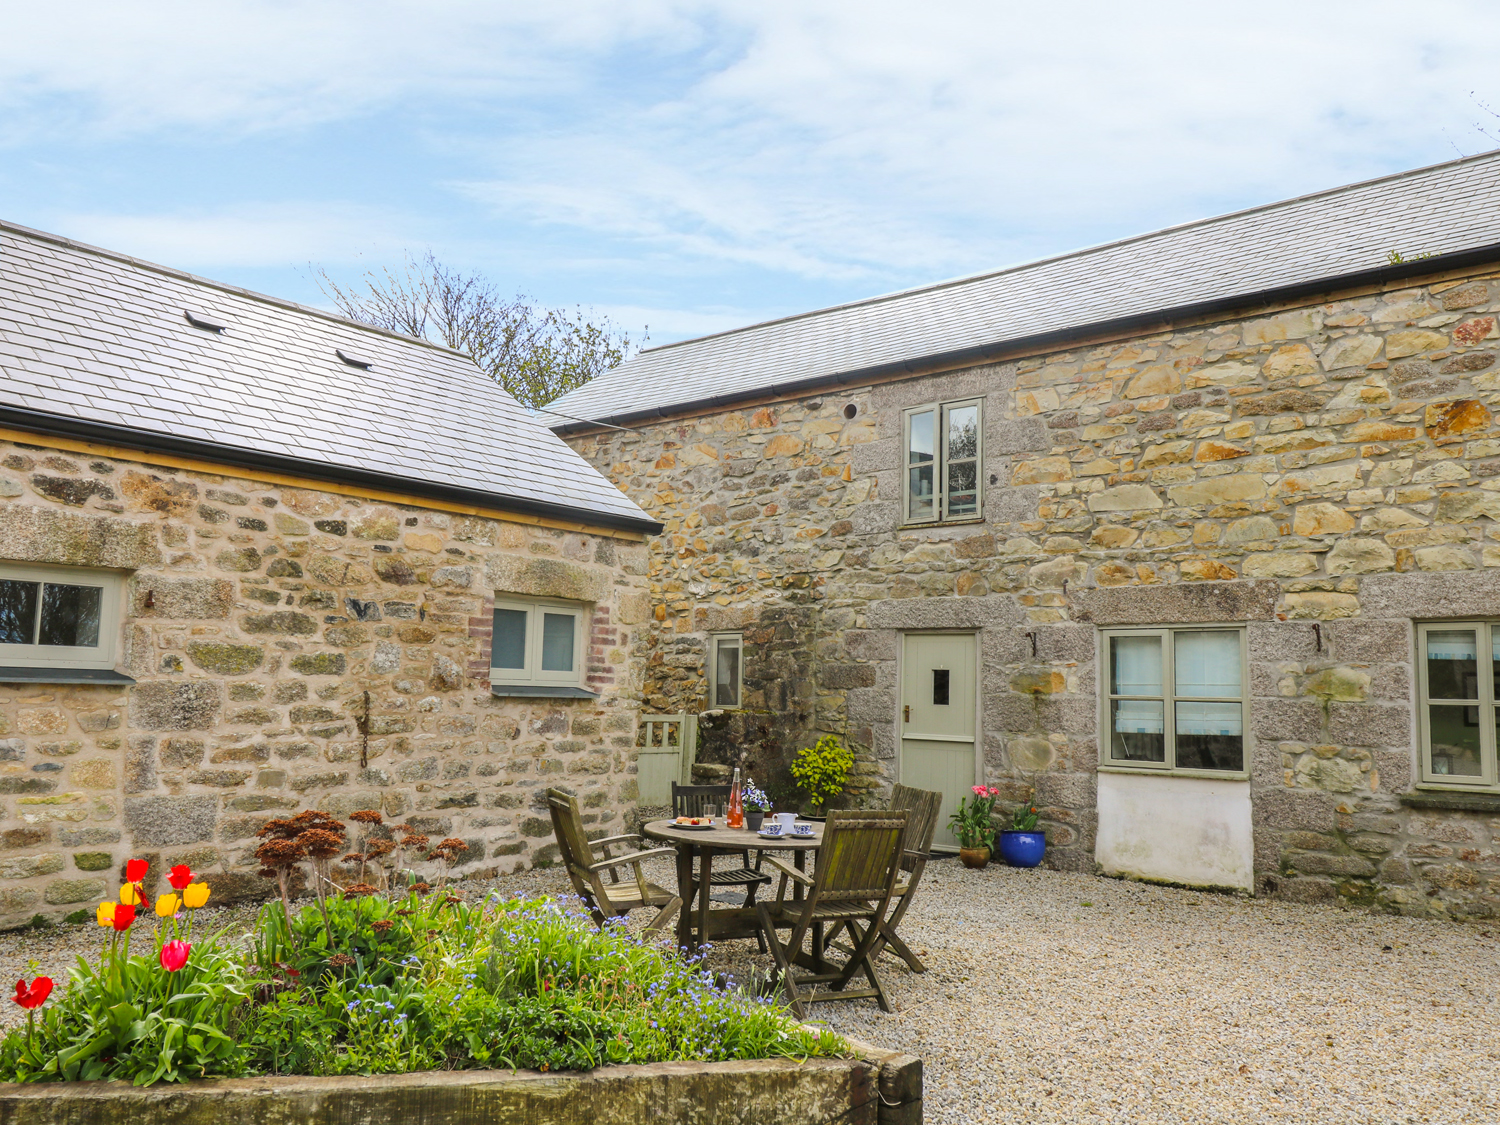 Bed holiday cottage cornwall